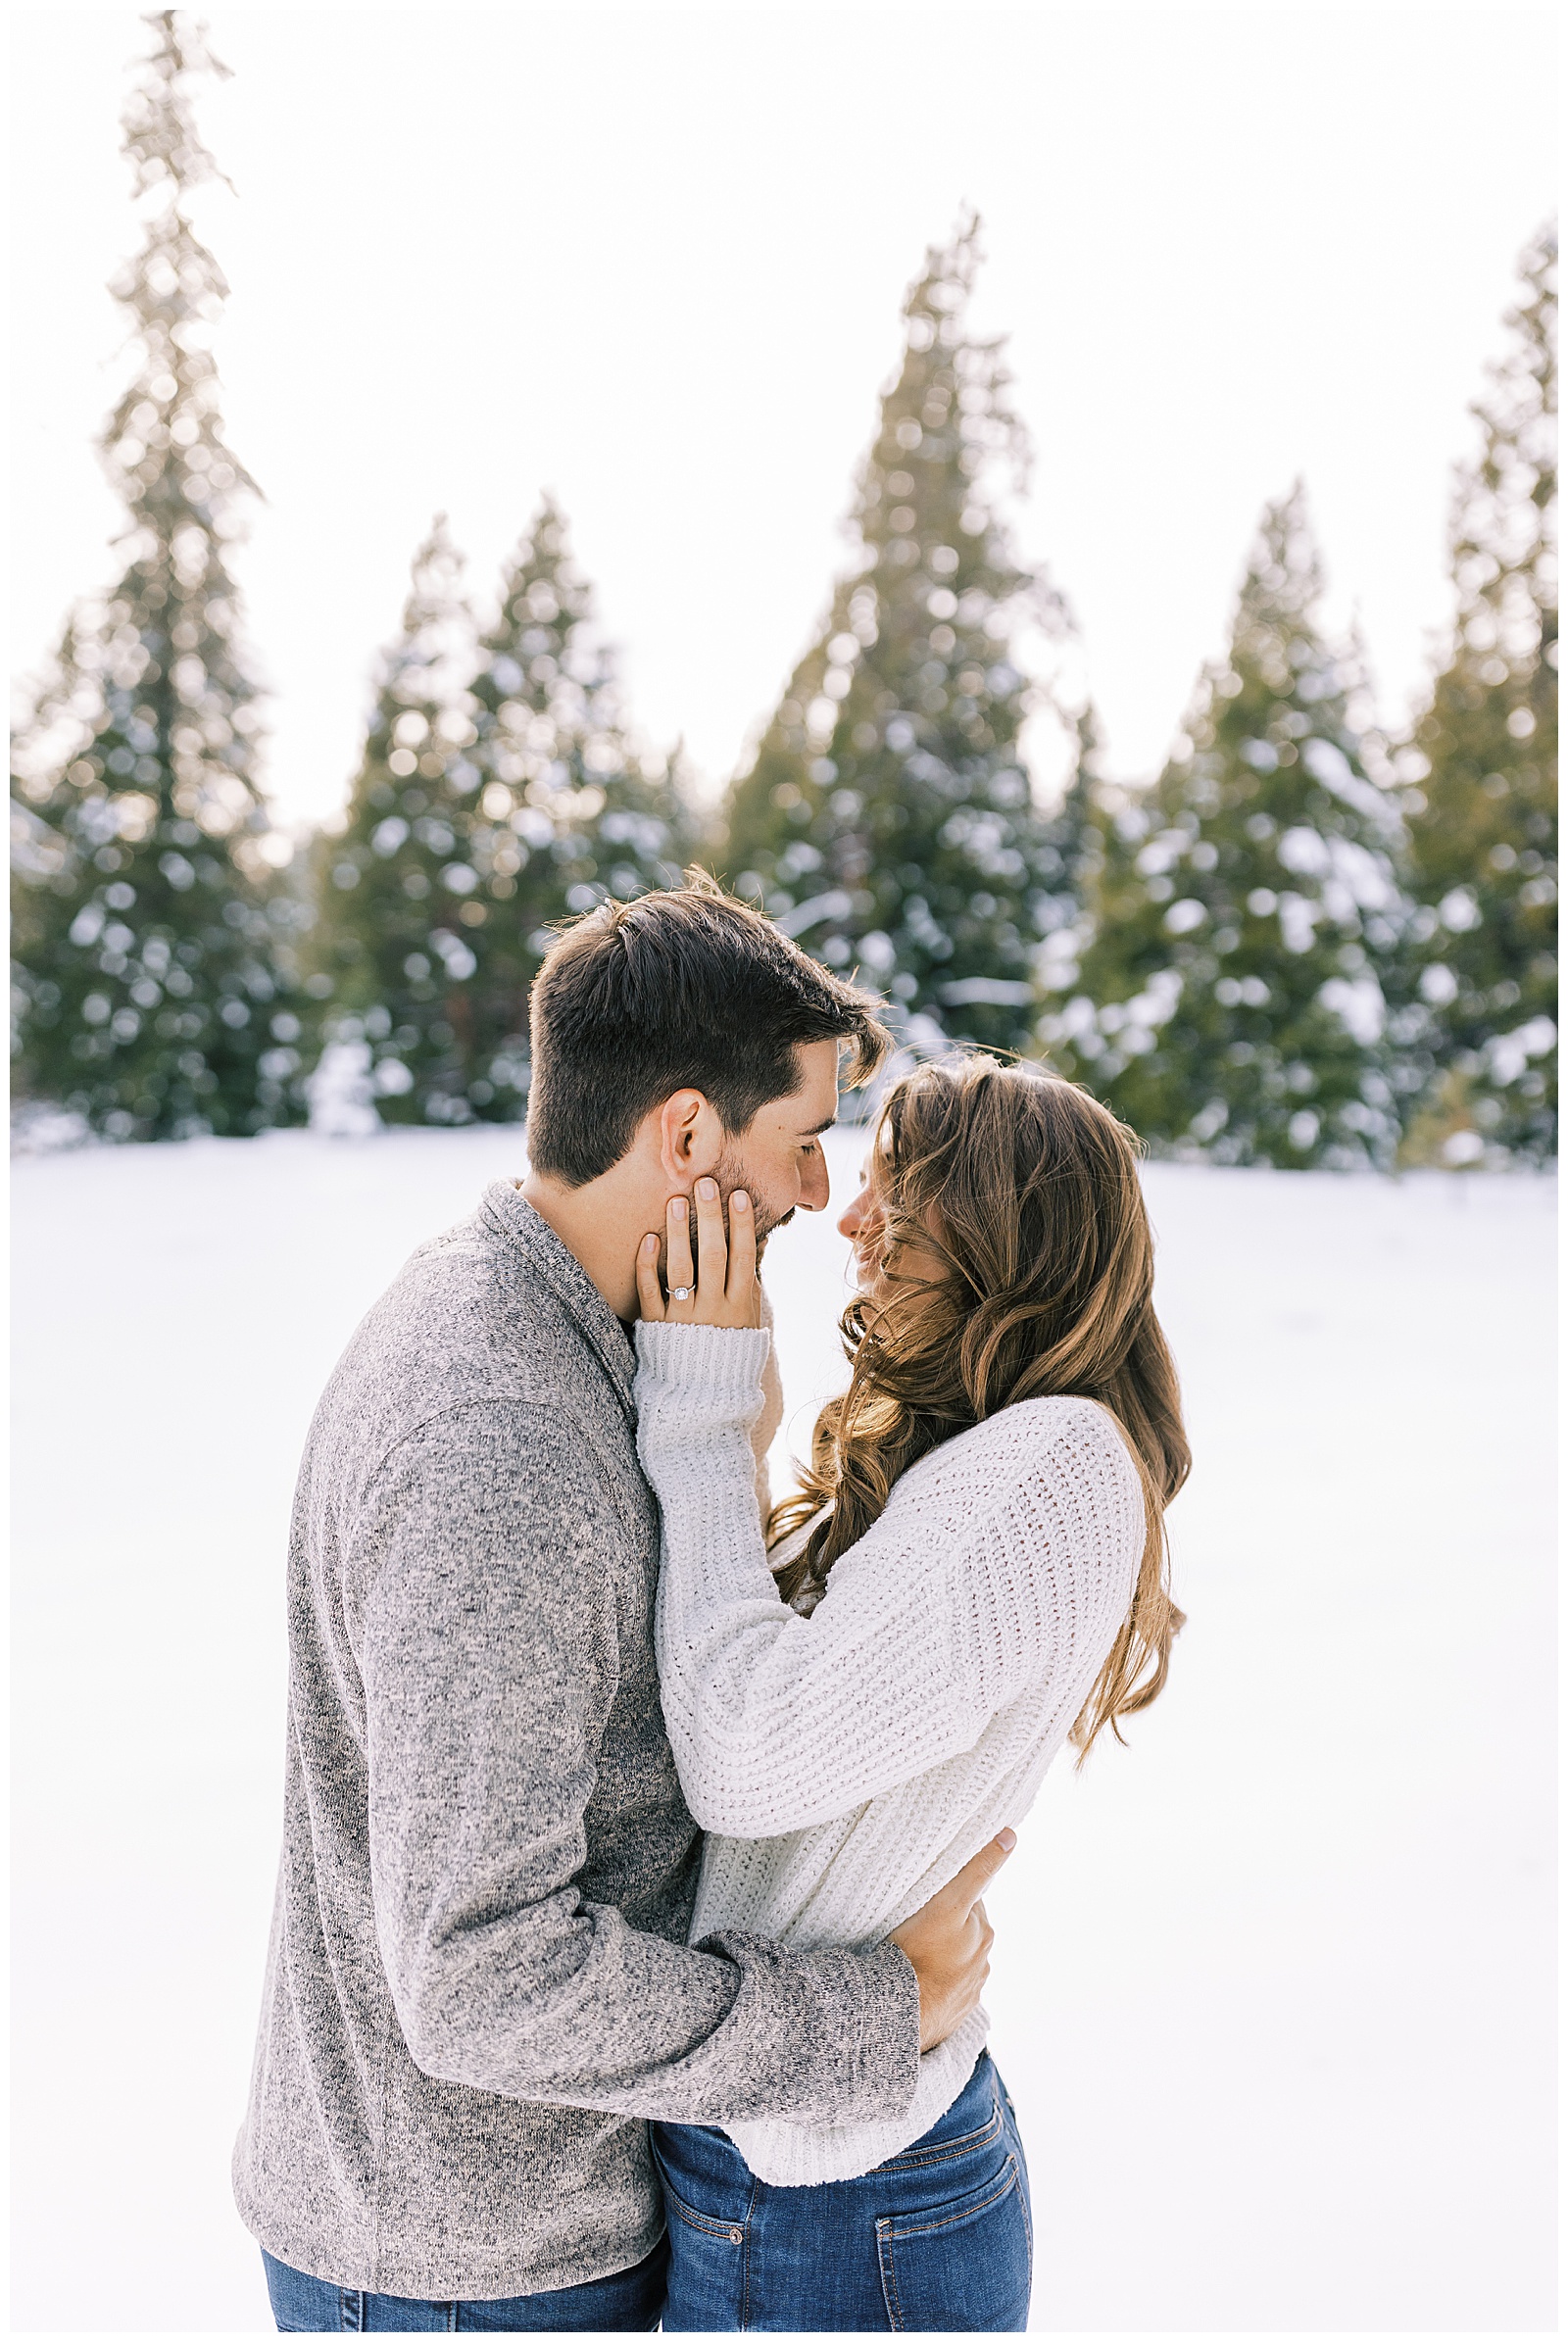 engaged couple wearing neutral sweaters snowy winter engagement photos